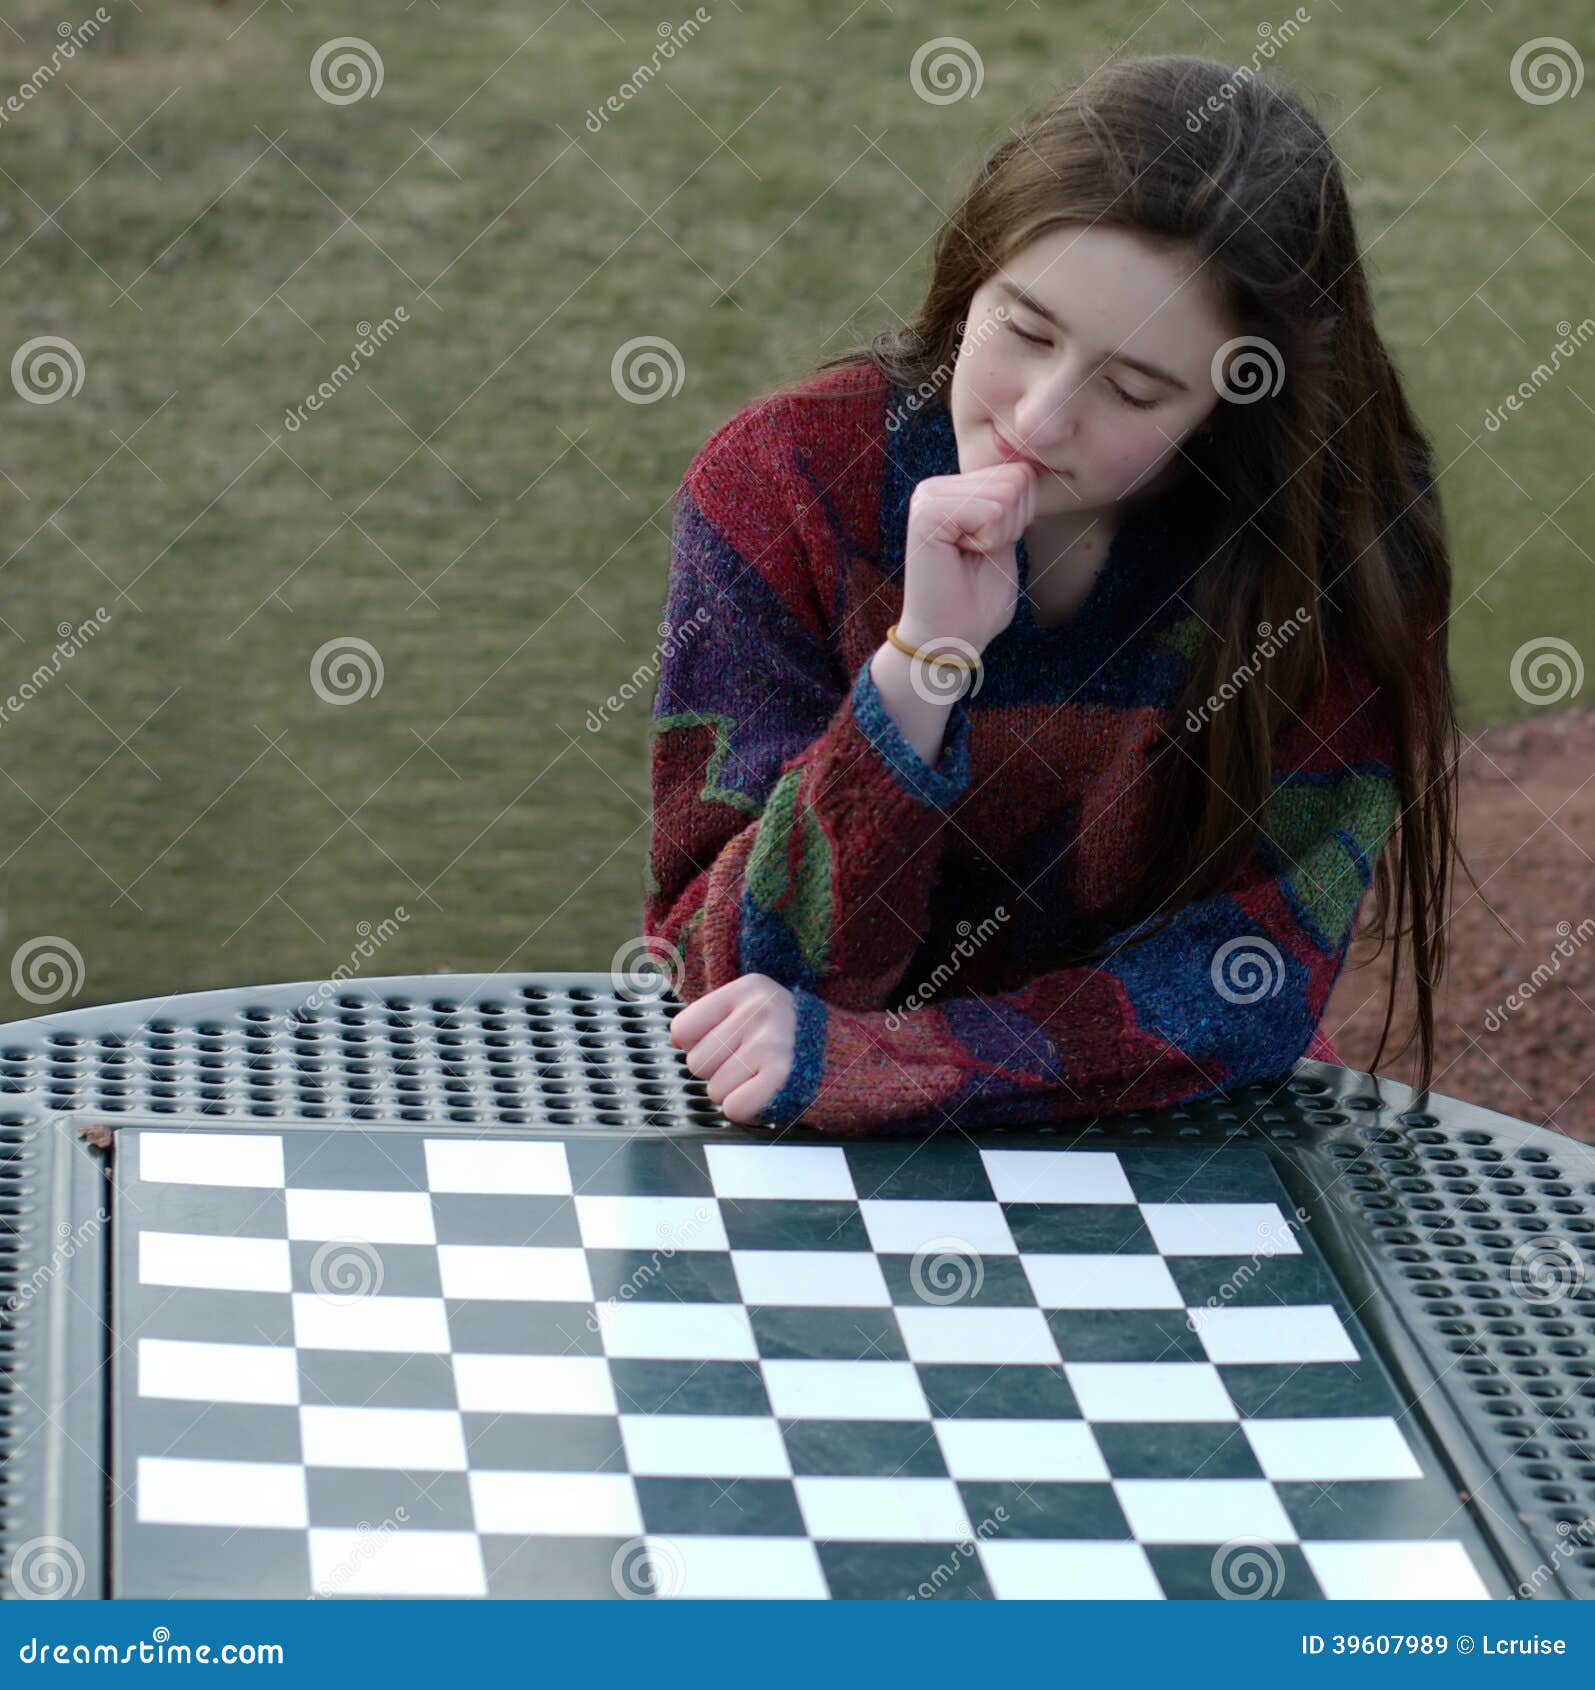 Next Chess Move stock image. Image of face, activity - 32358601